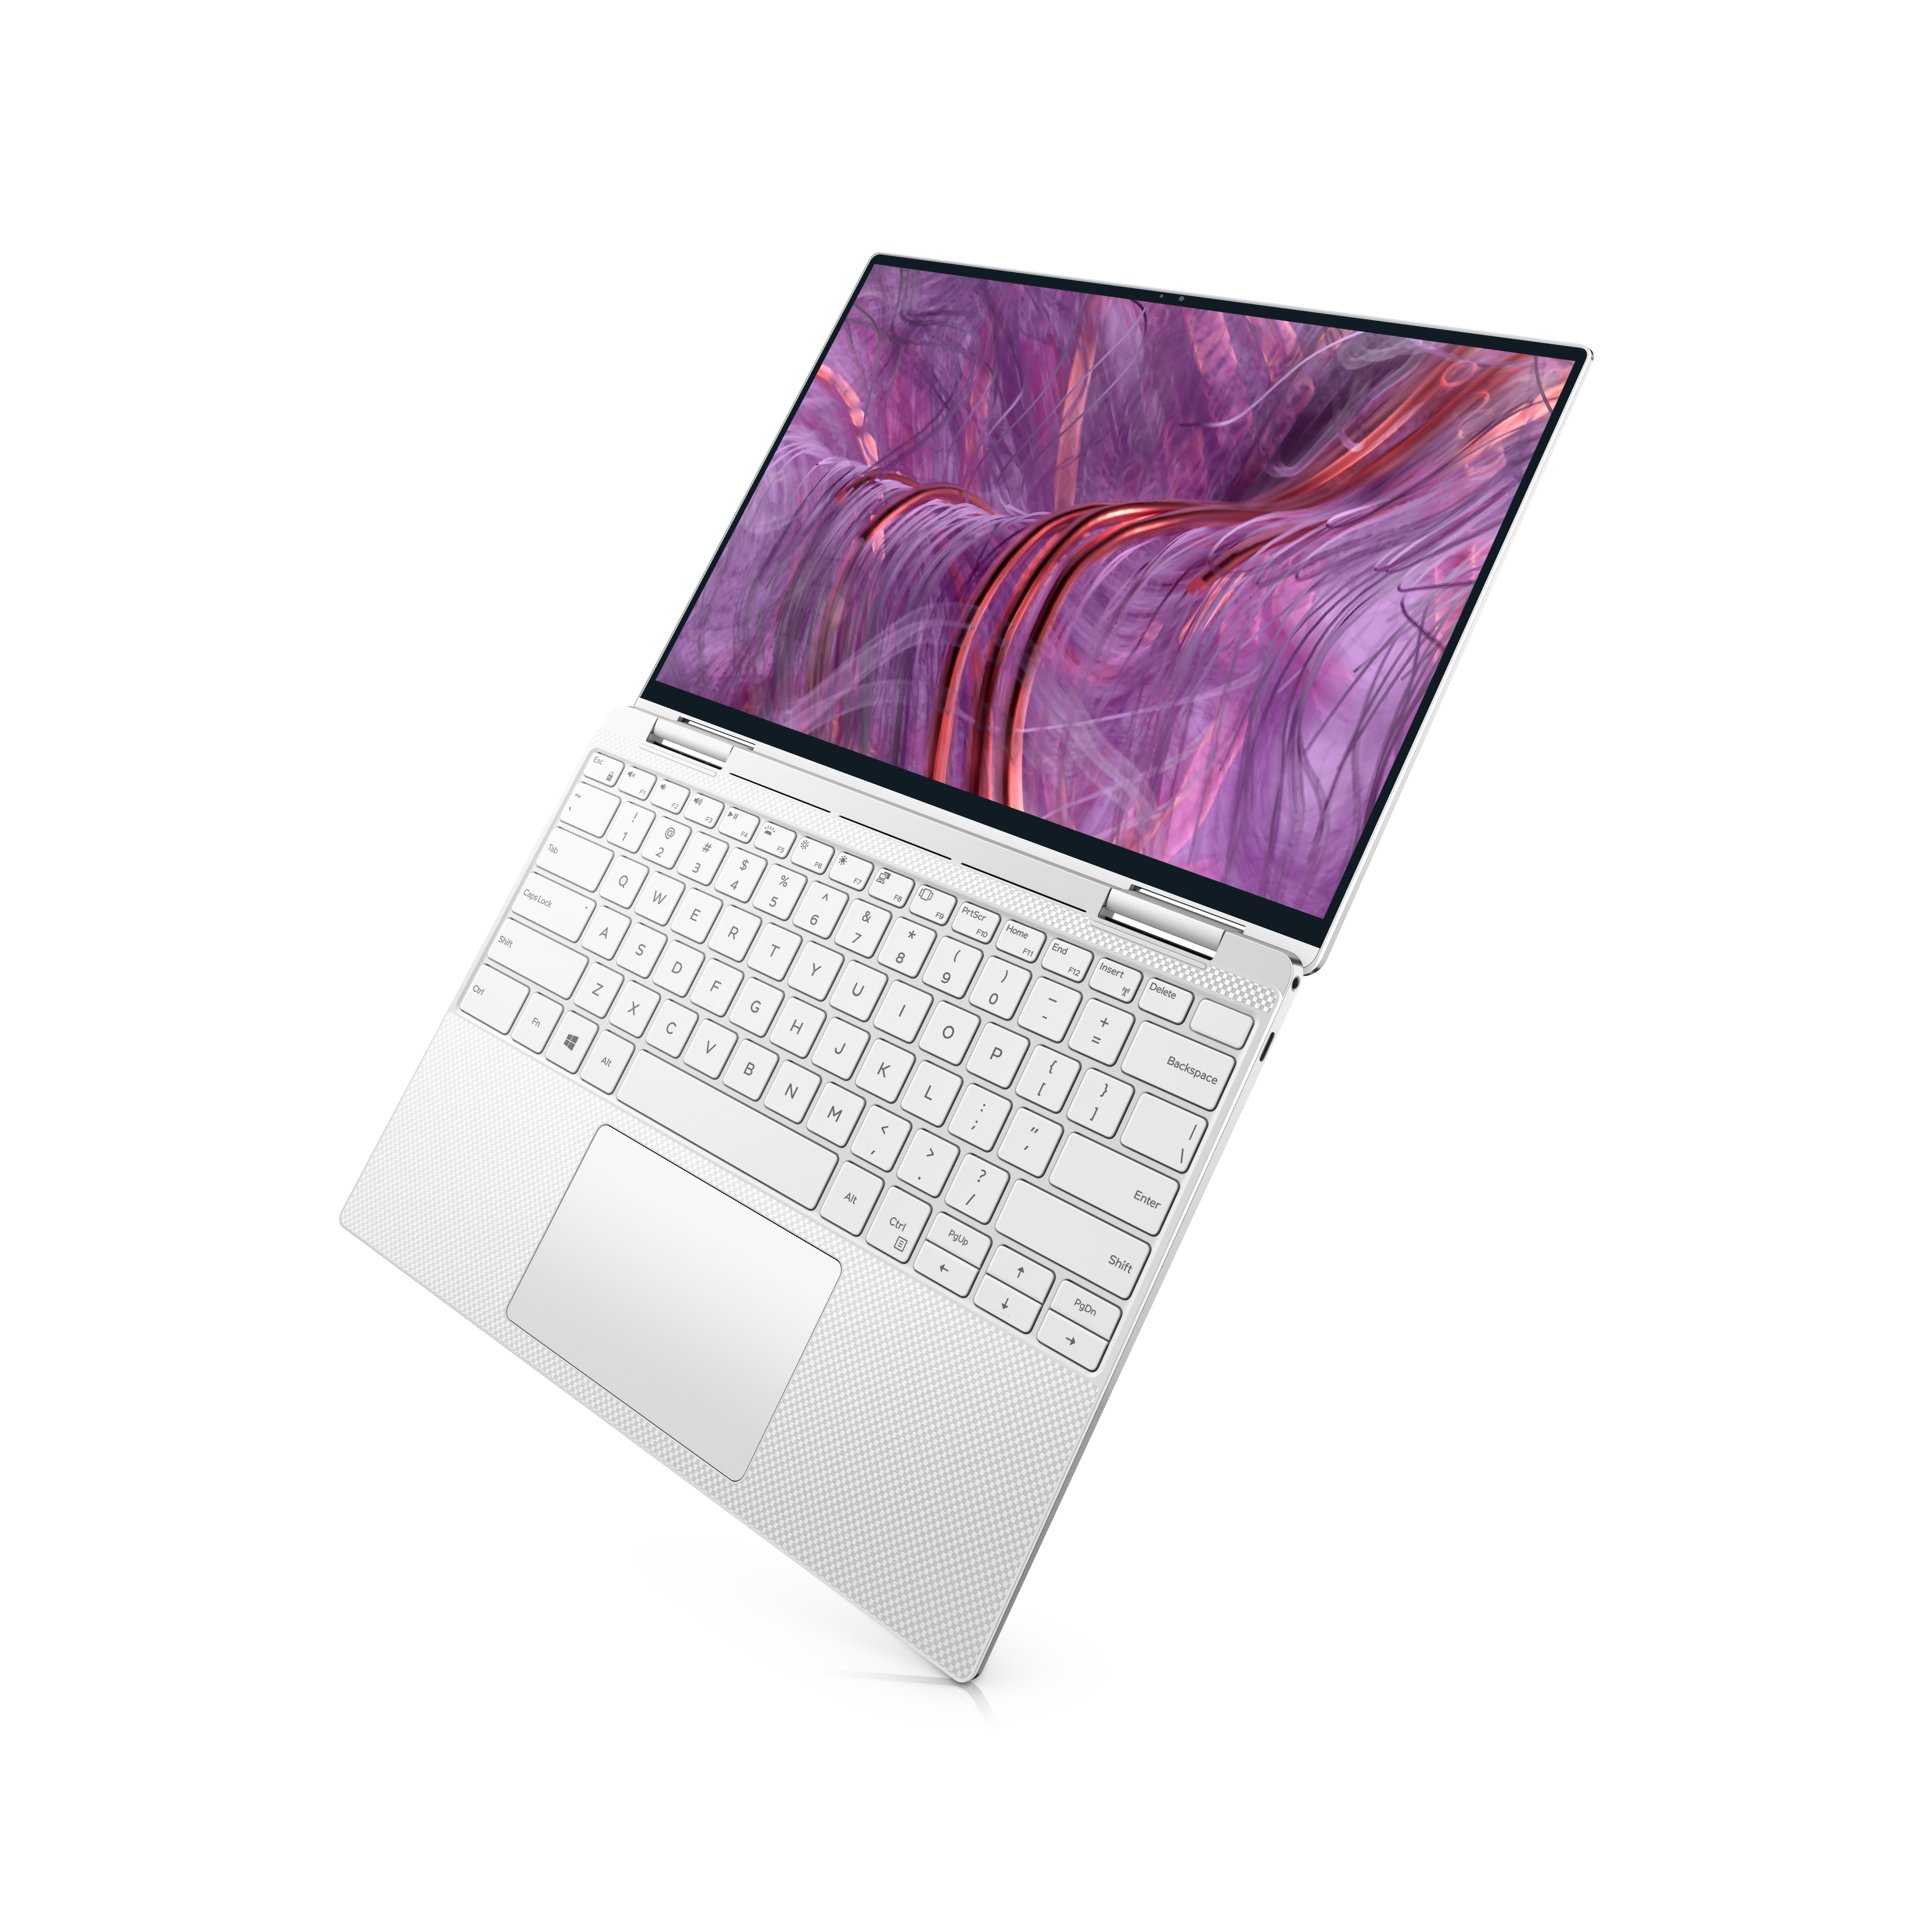 Dell XPS 13 2-in-1 Laptop | Dell 日本